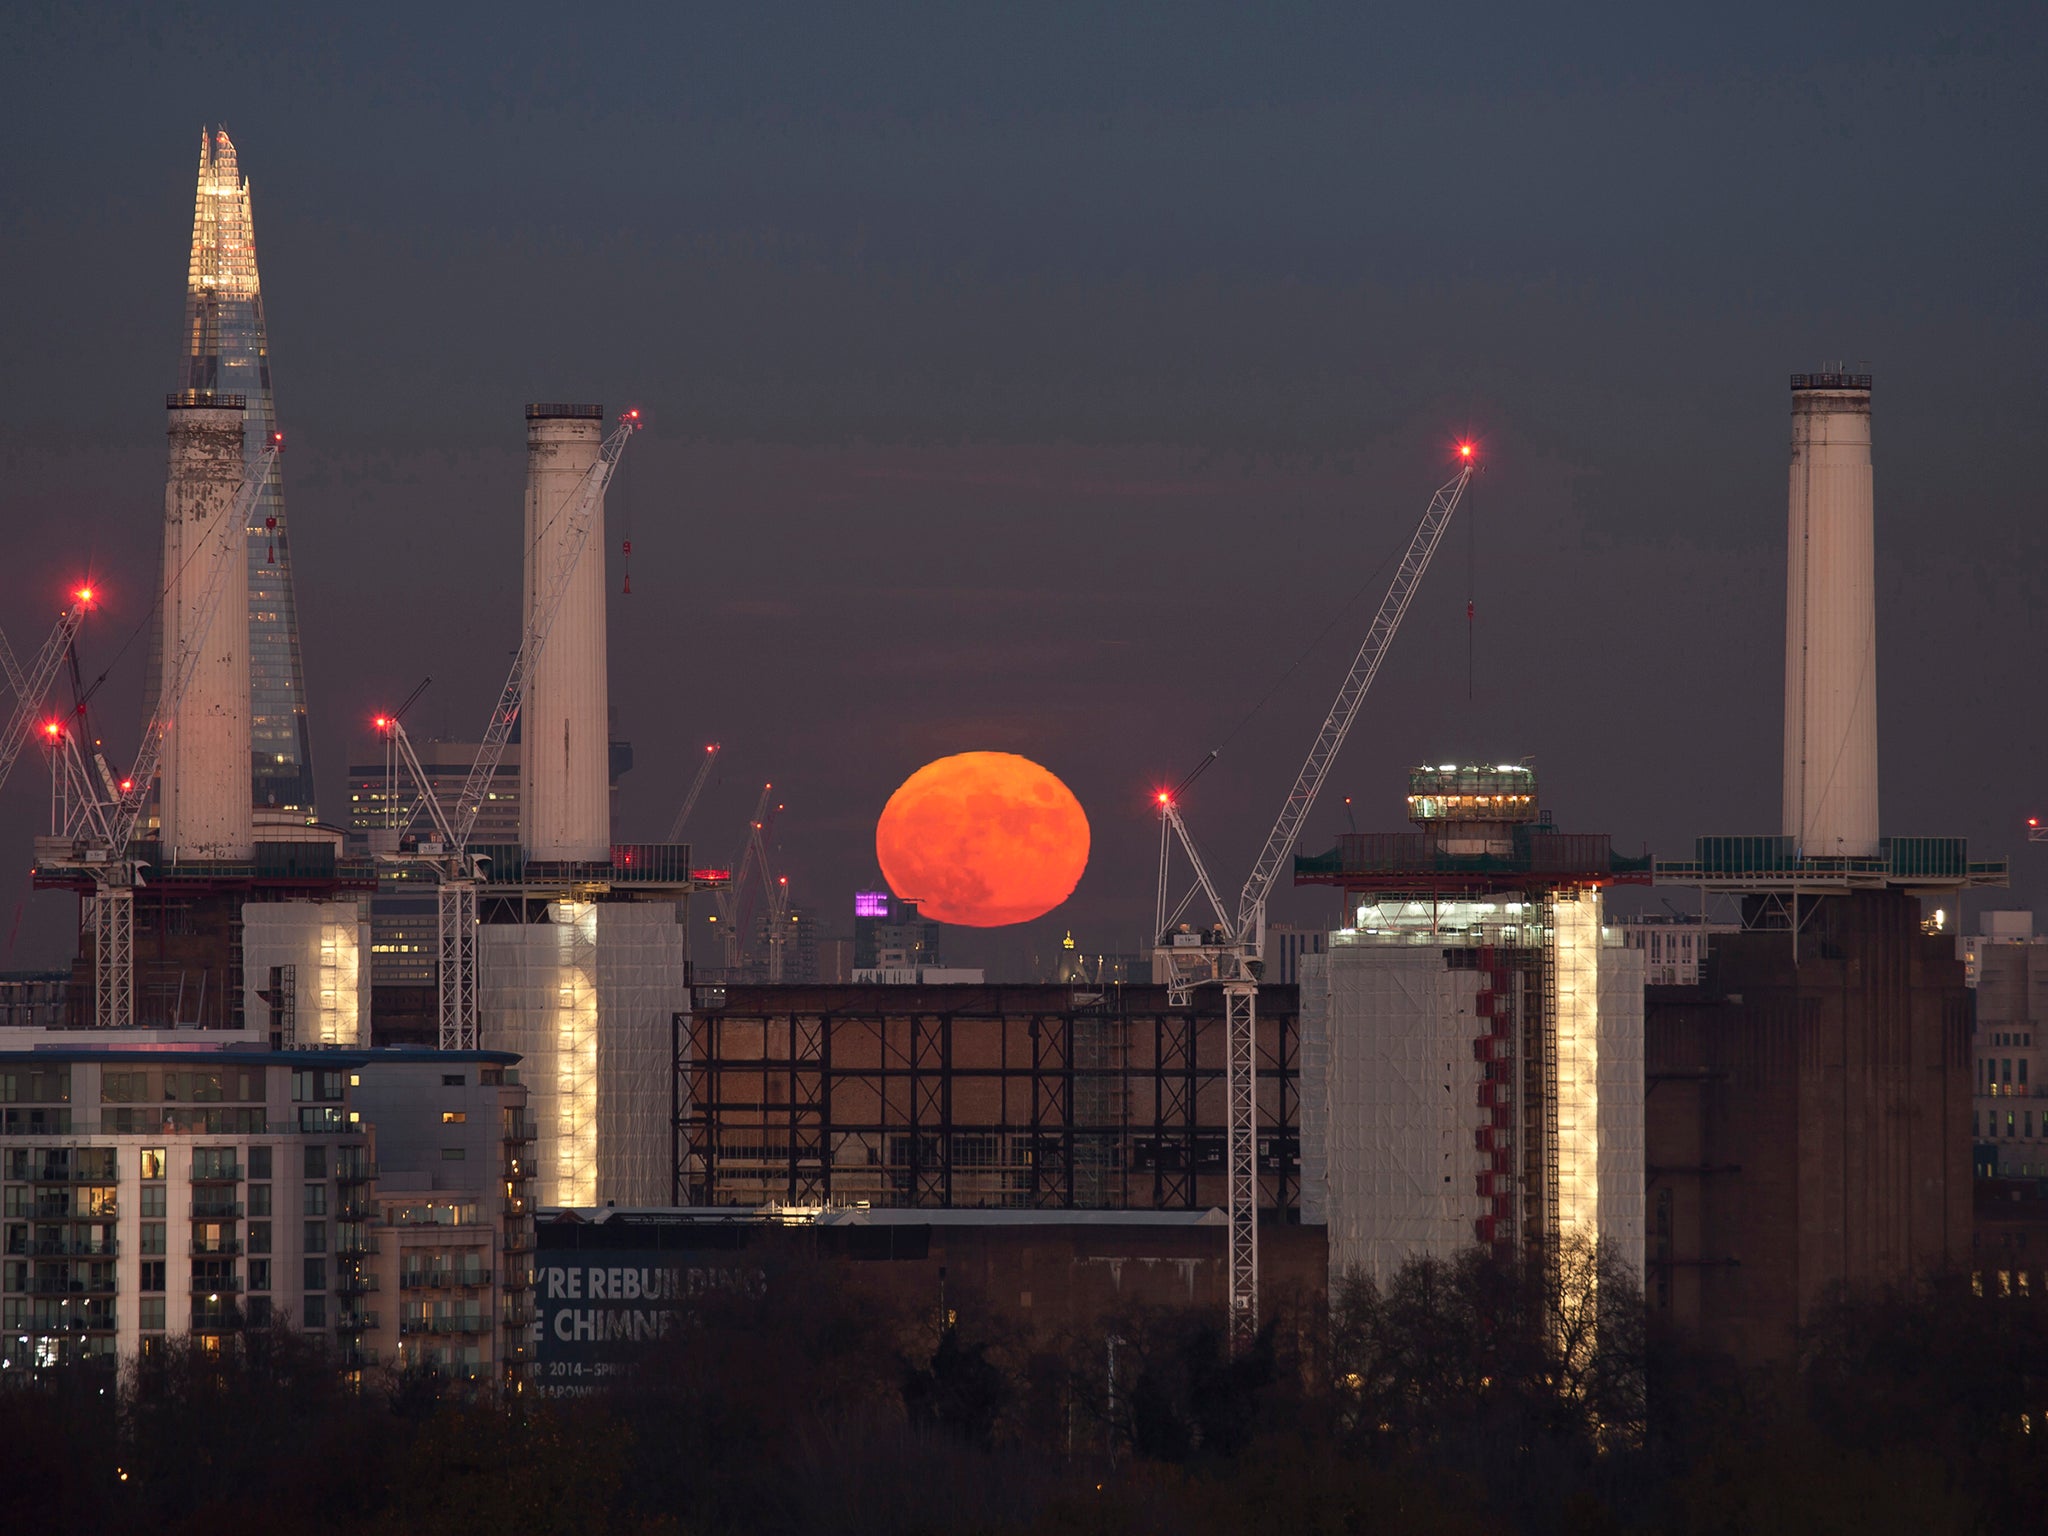 Stunning images from the photographer James Burns showed London illuminated by a seemingly huge full moon.